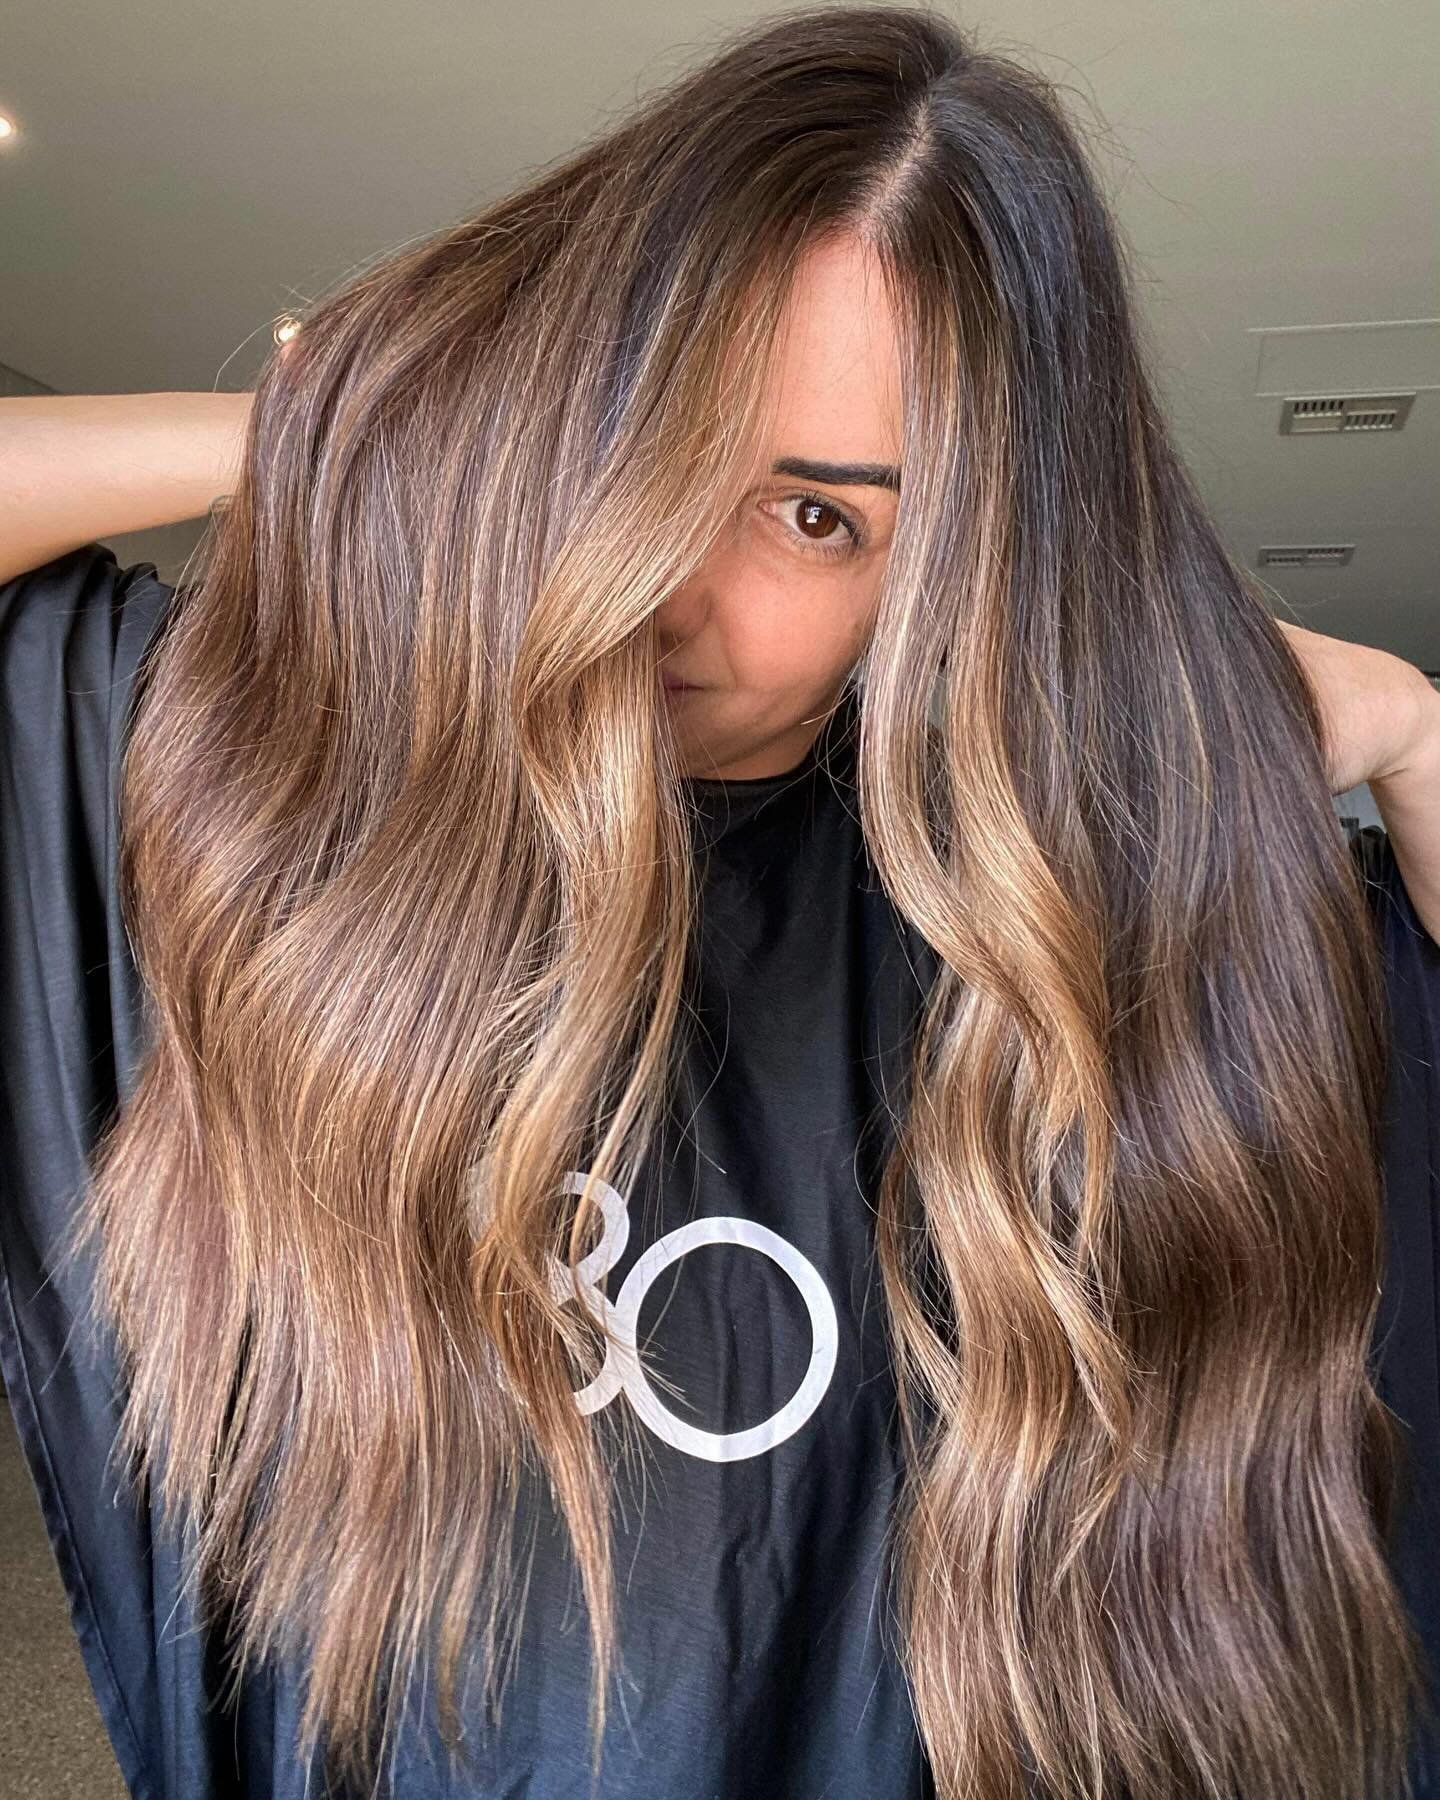 Oh hey there! 👁️ 
Transforming this mane from DRAB TO FAB!
A combo of highlights and tip outs completed this lived in dimensional brunette. 
&bull;
#brunette #longbrunettehair #bunburybrunette #bunburyhairdresser #ezfoil #originalmineral #cleancolou